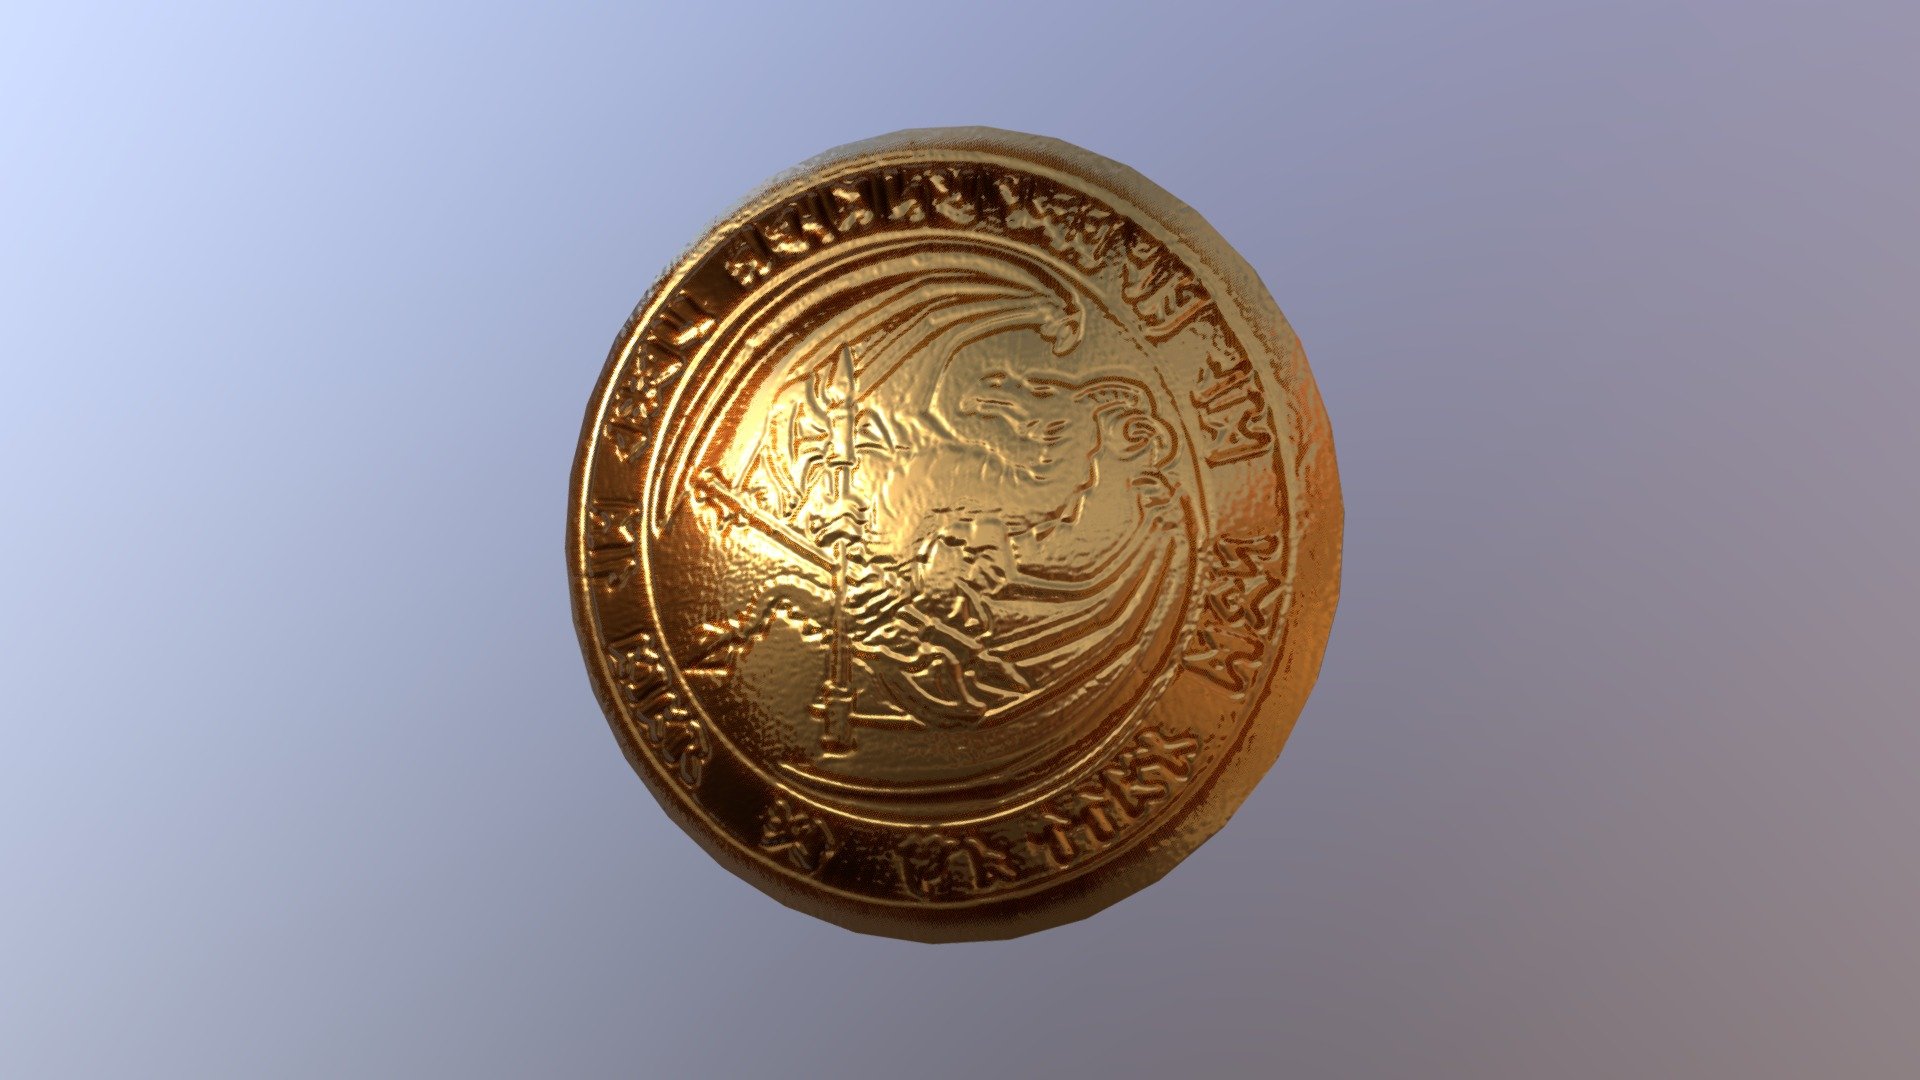 d-d-coin-download-free-3d-model-by-madhatmodder-31e341f-sketchfab